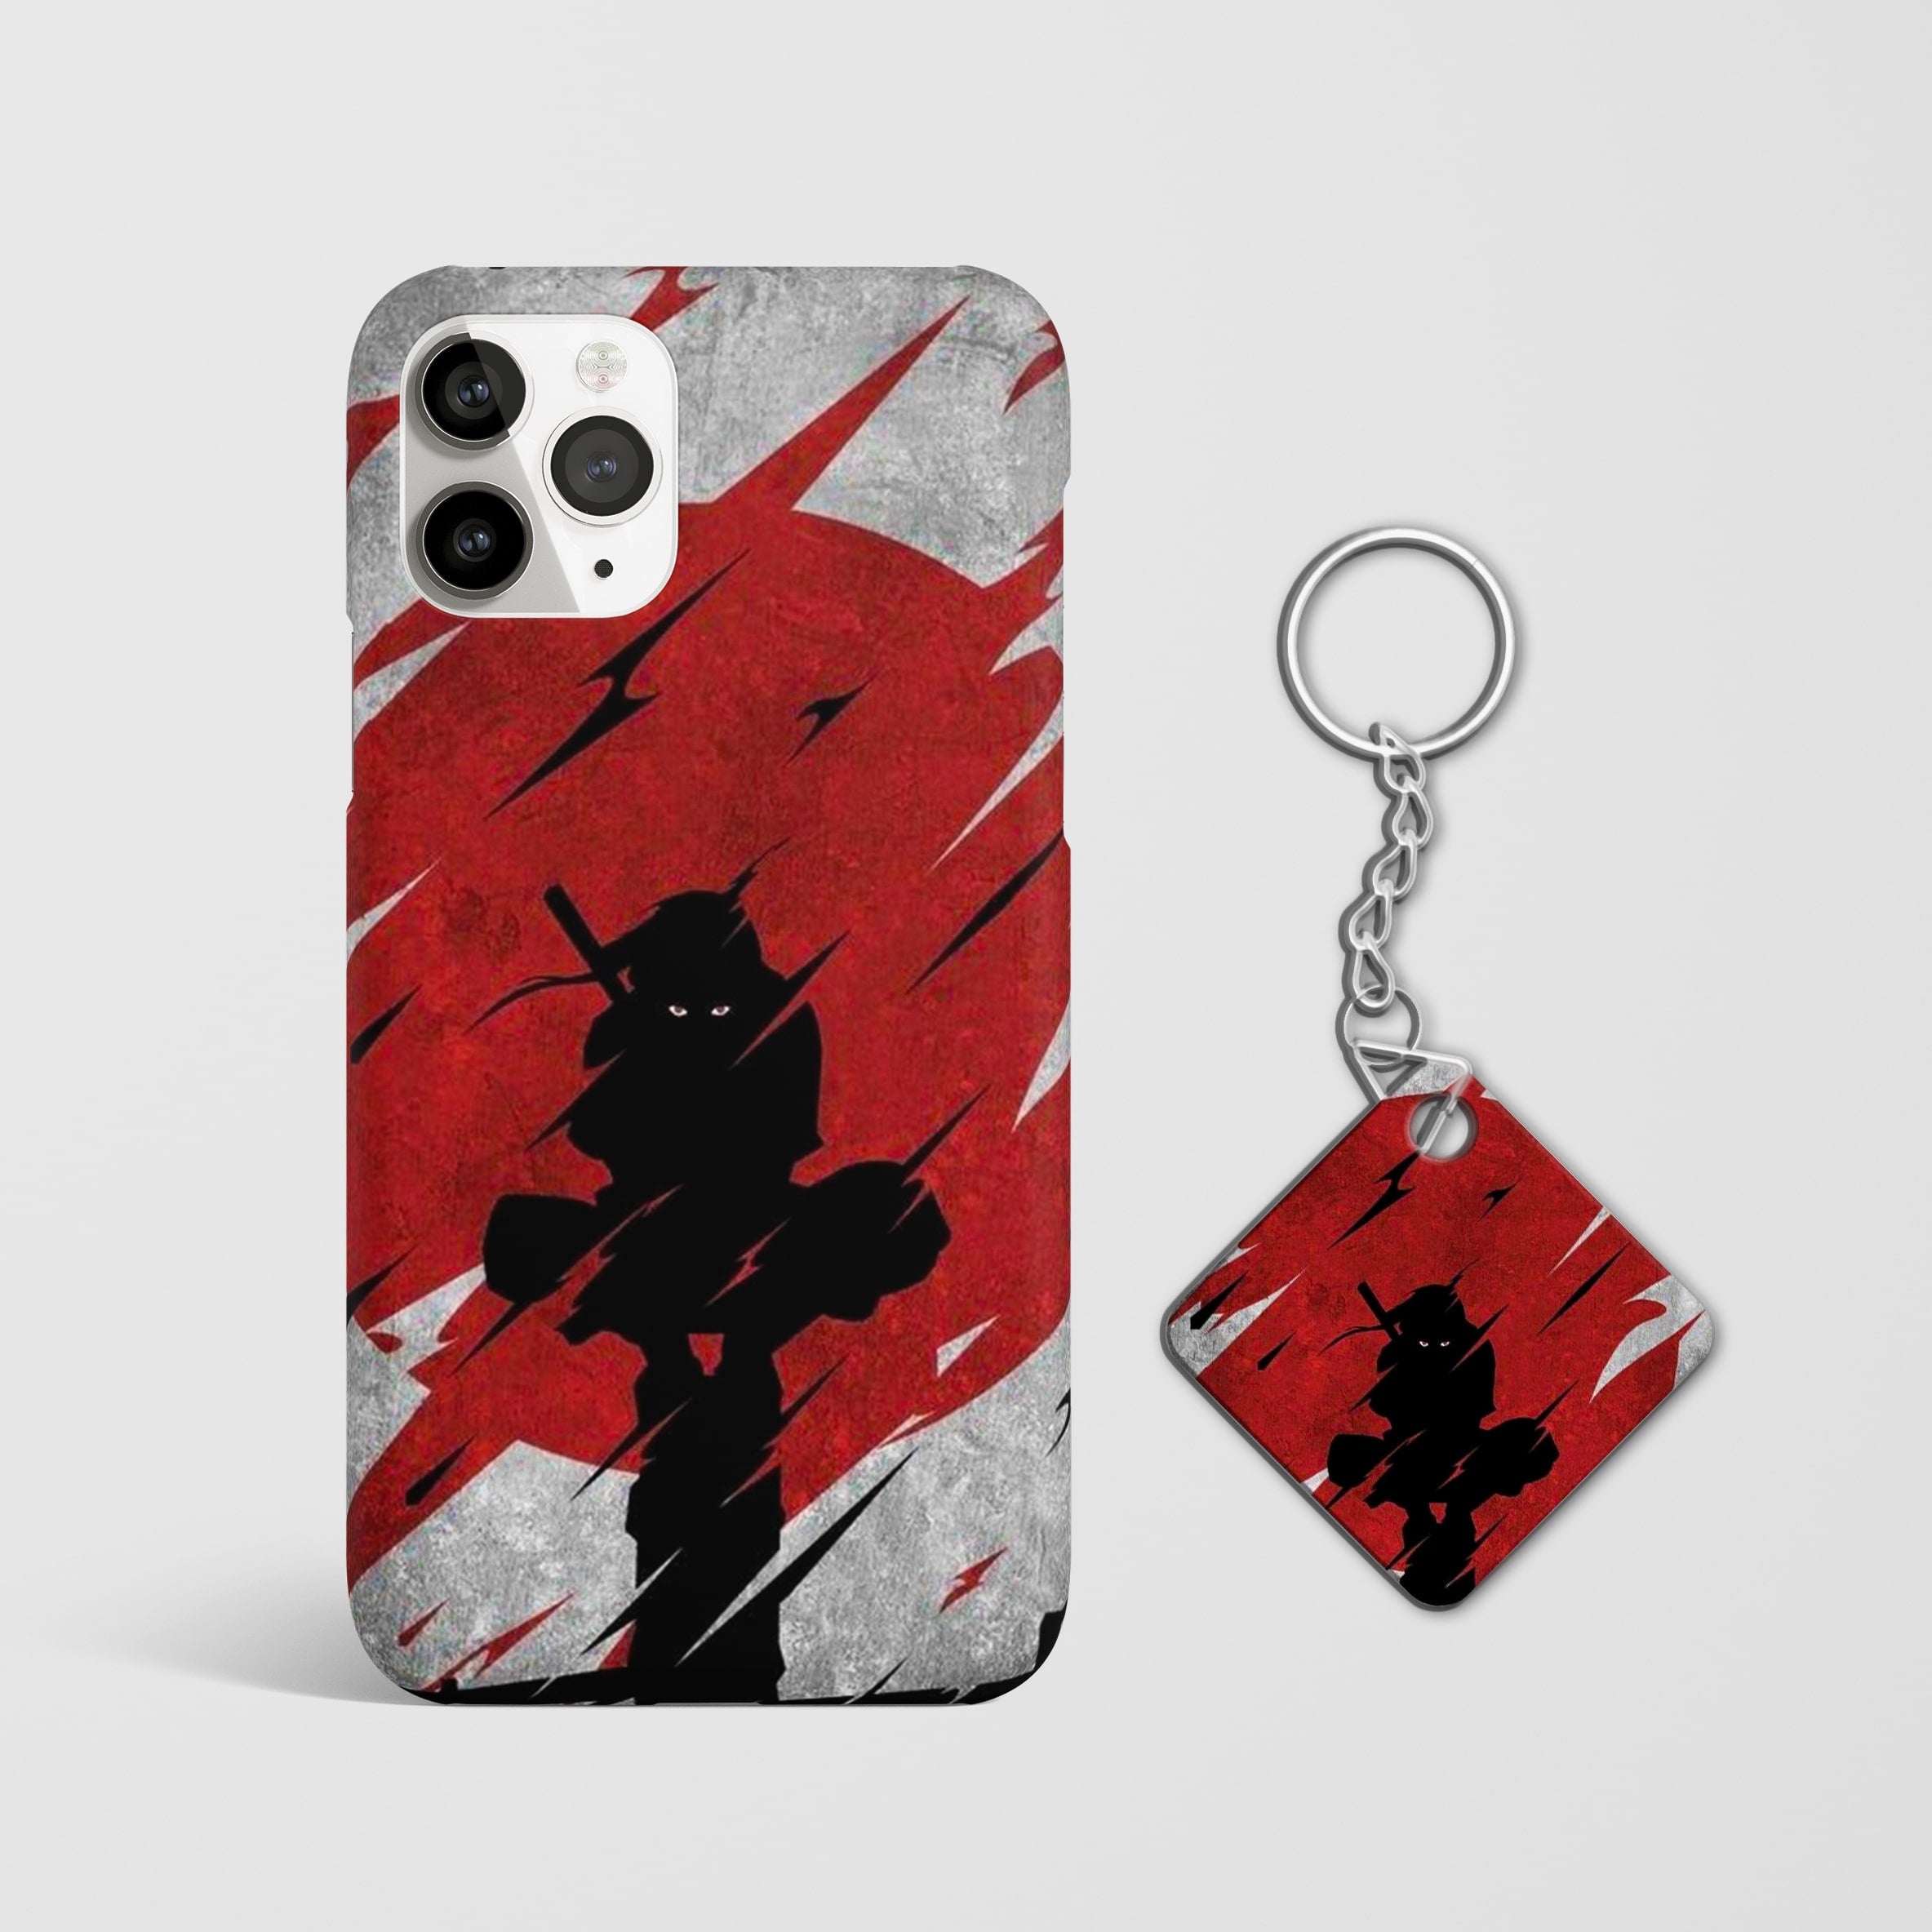 Close-up of the Sasuke Uchiha Clan Phone Cover, showcasing the intricate 3D matte design with Keychain.